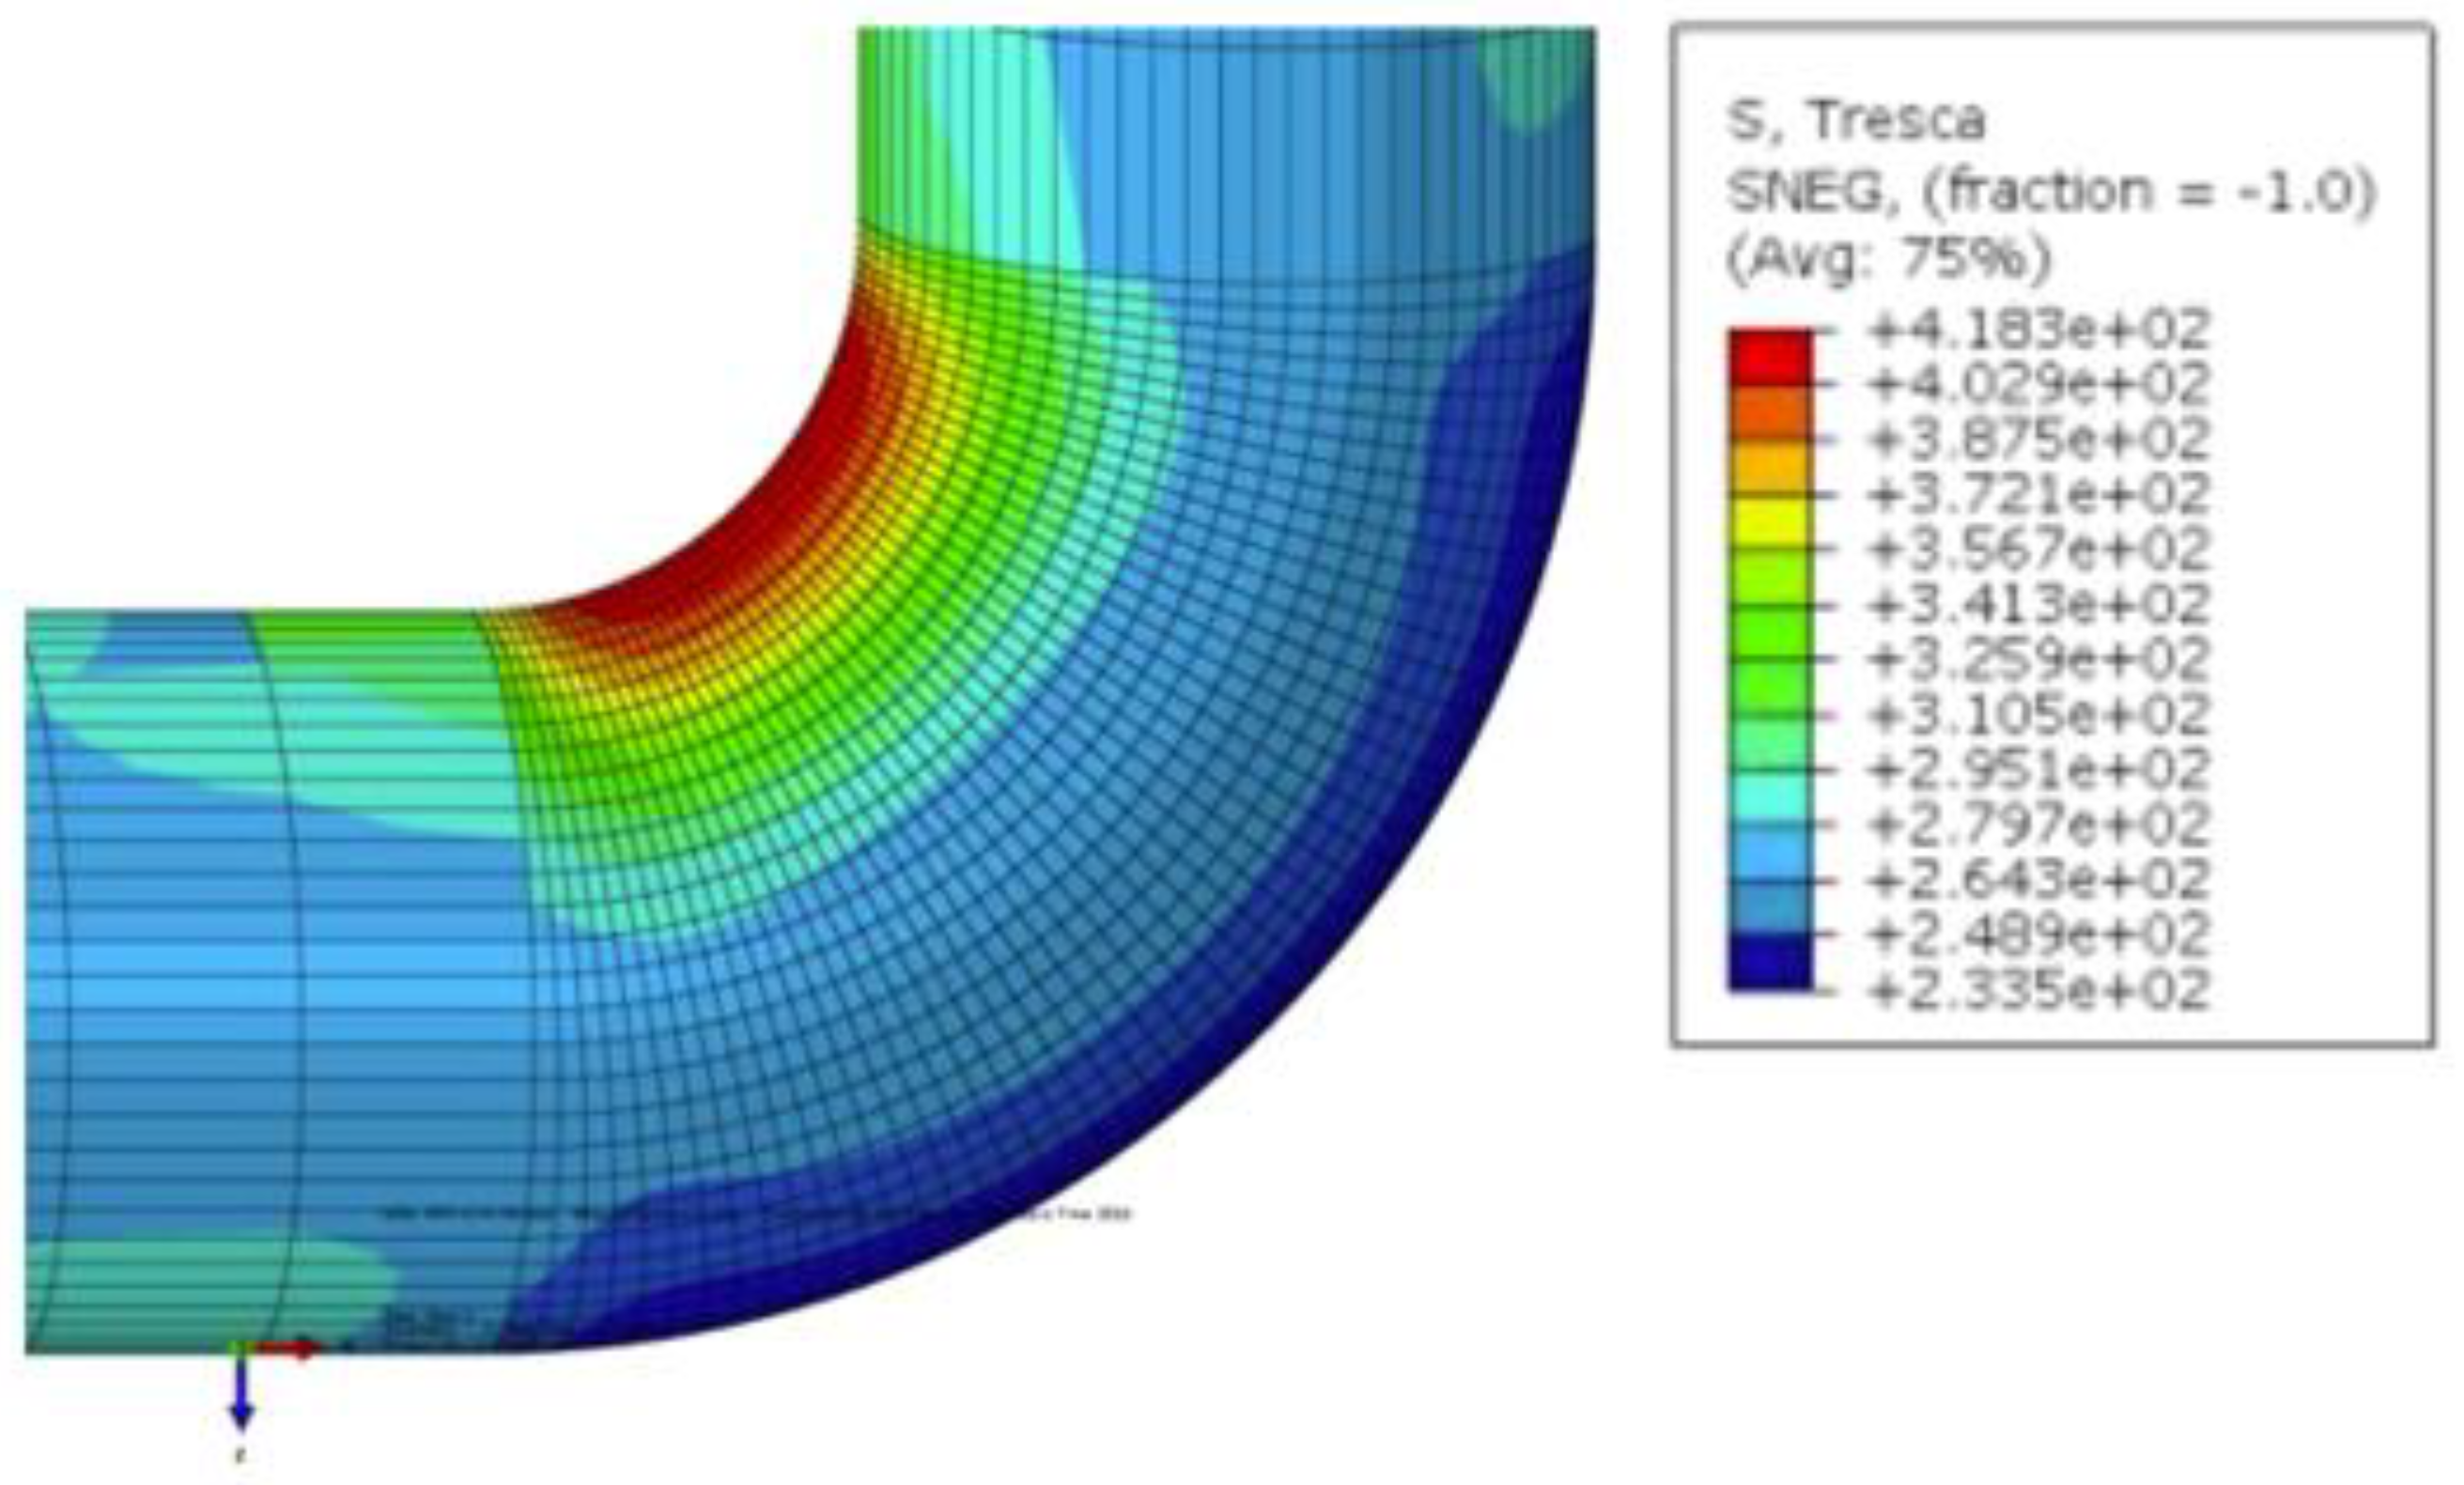 Should you worry about axial thrust issues as an end-user?